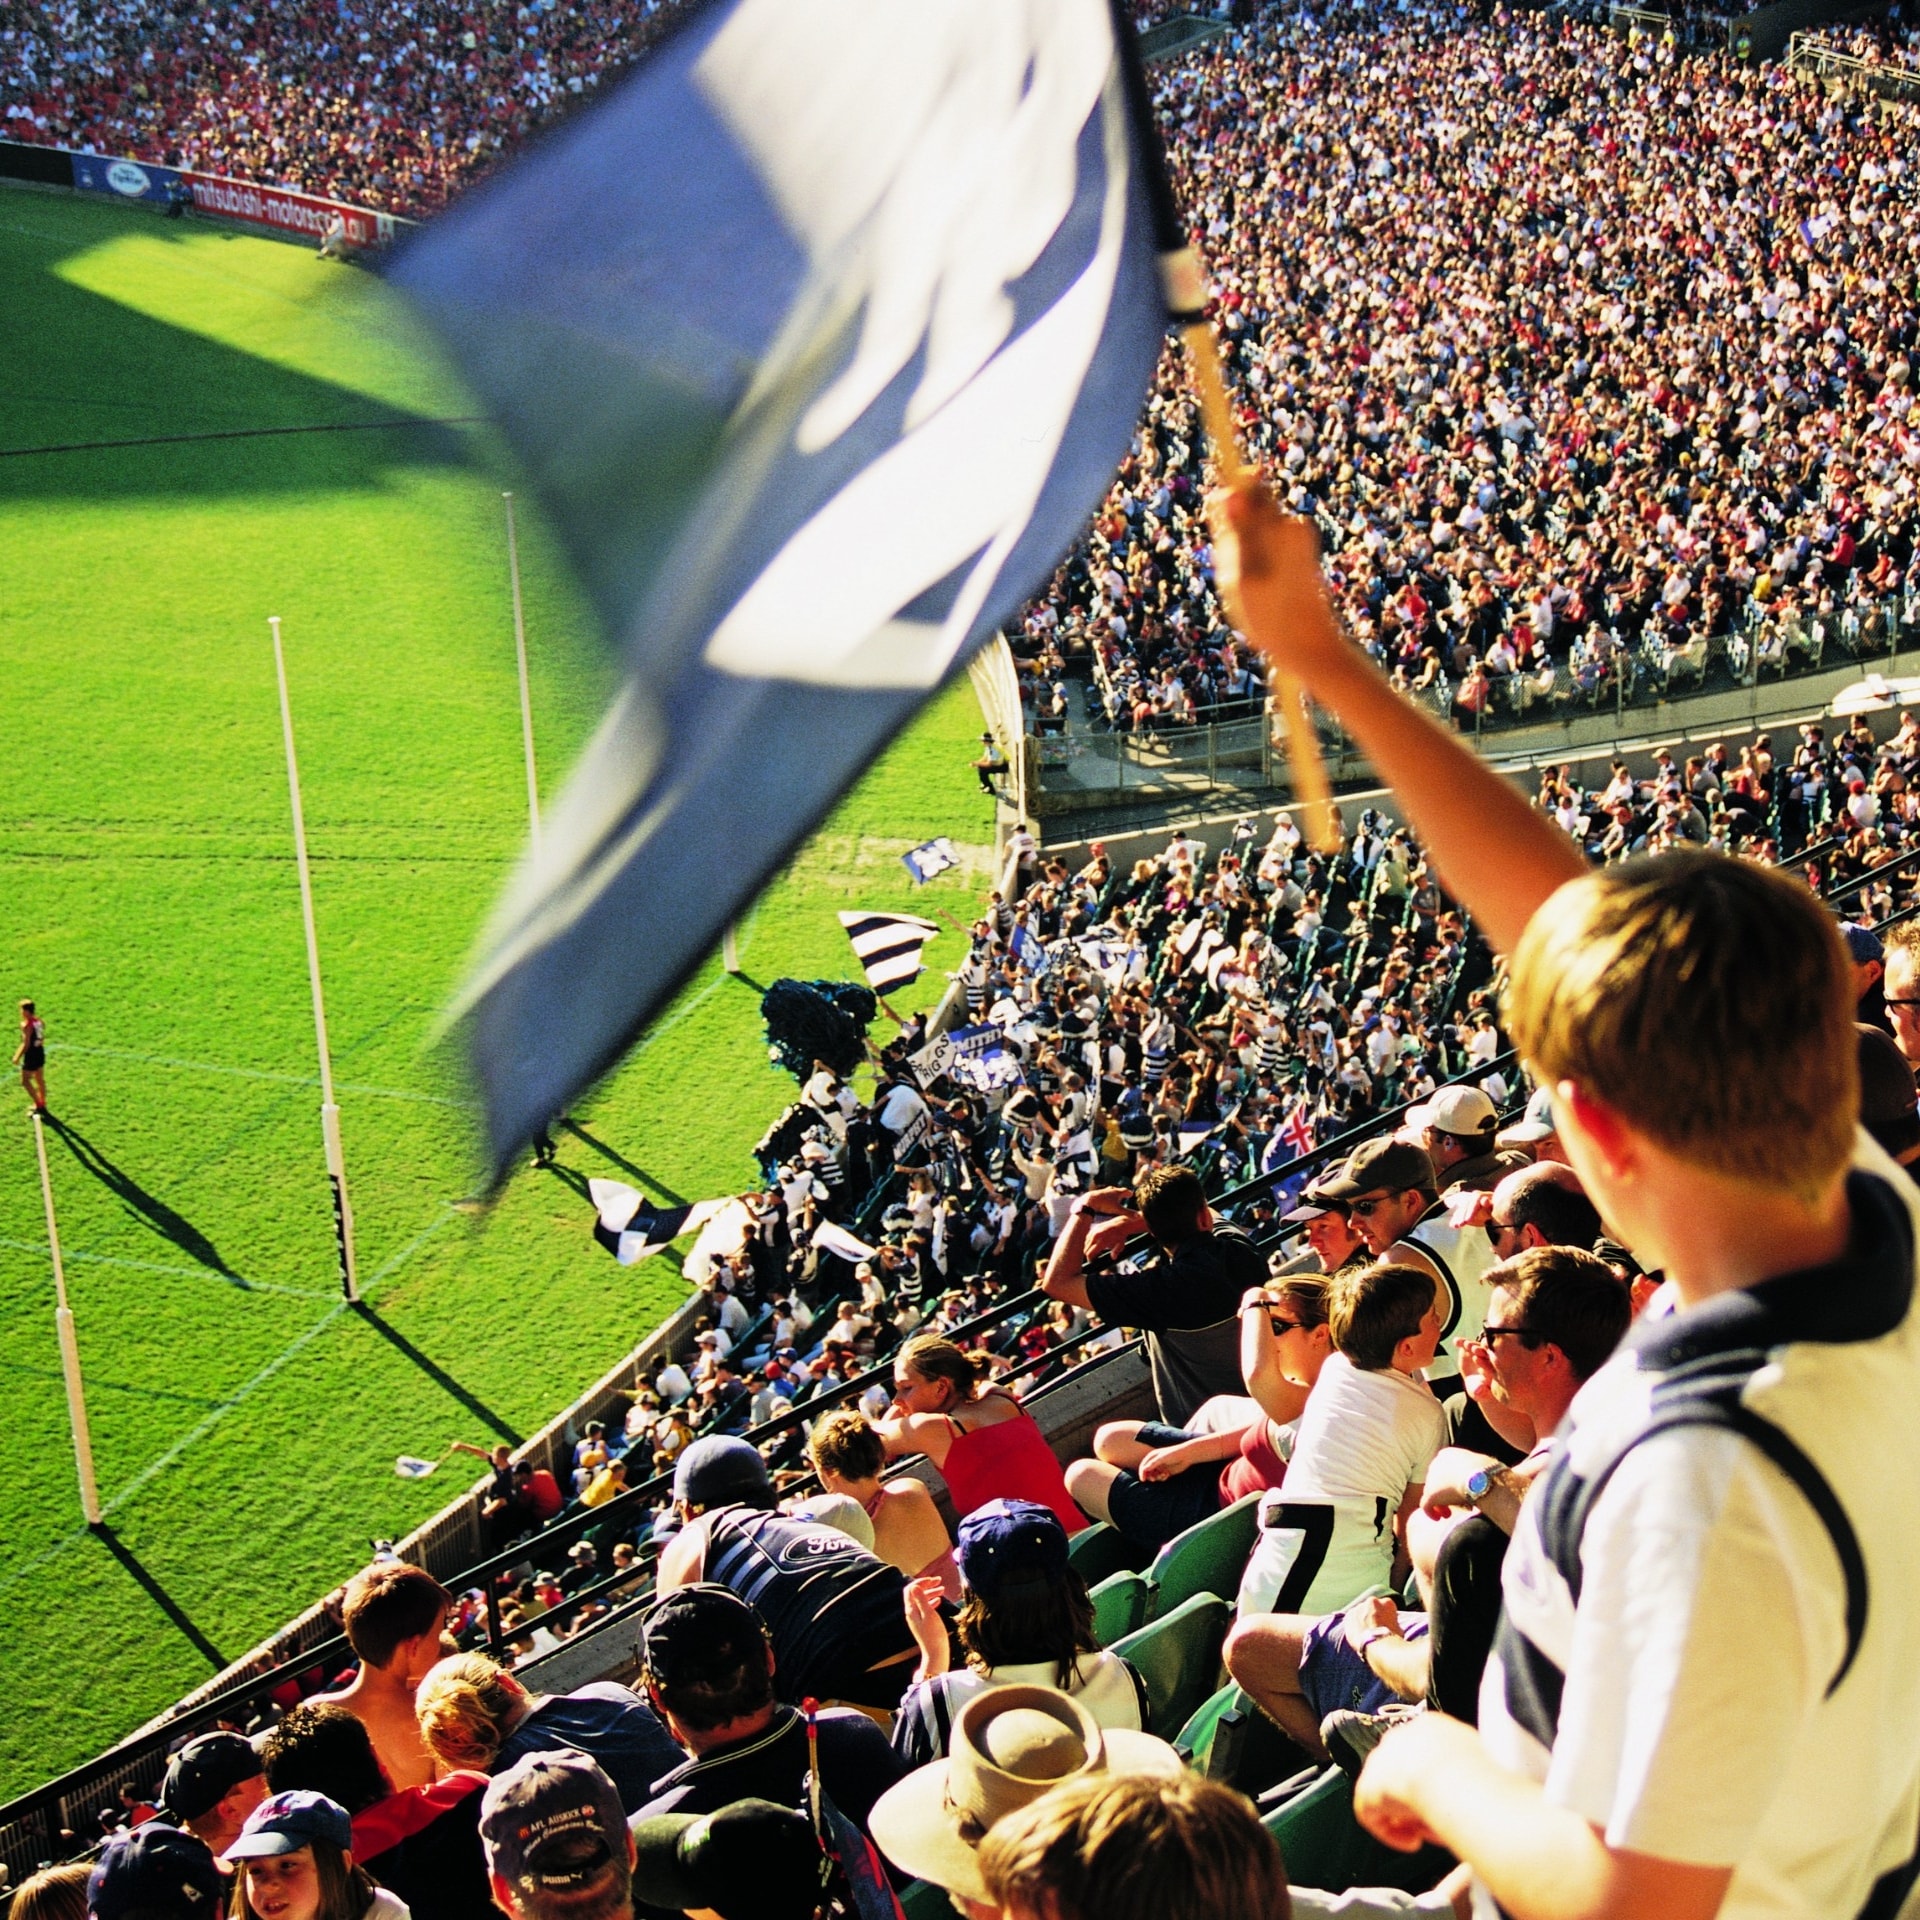 Fan waves flag at the AFL grand final in Melbourne © Tourism Victoria